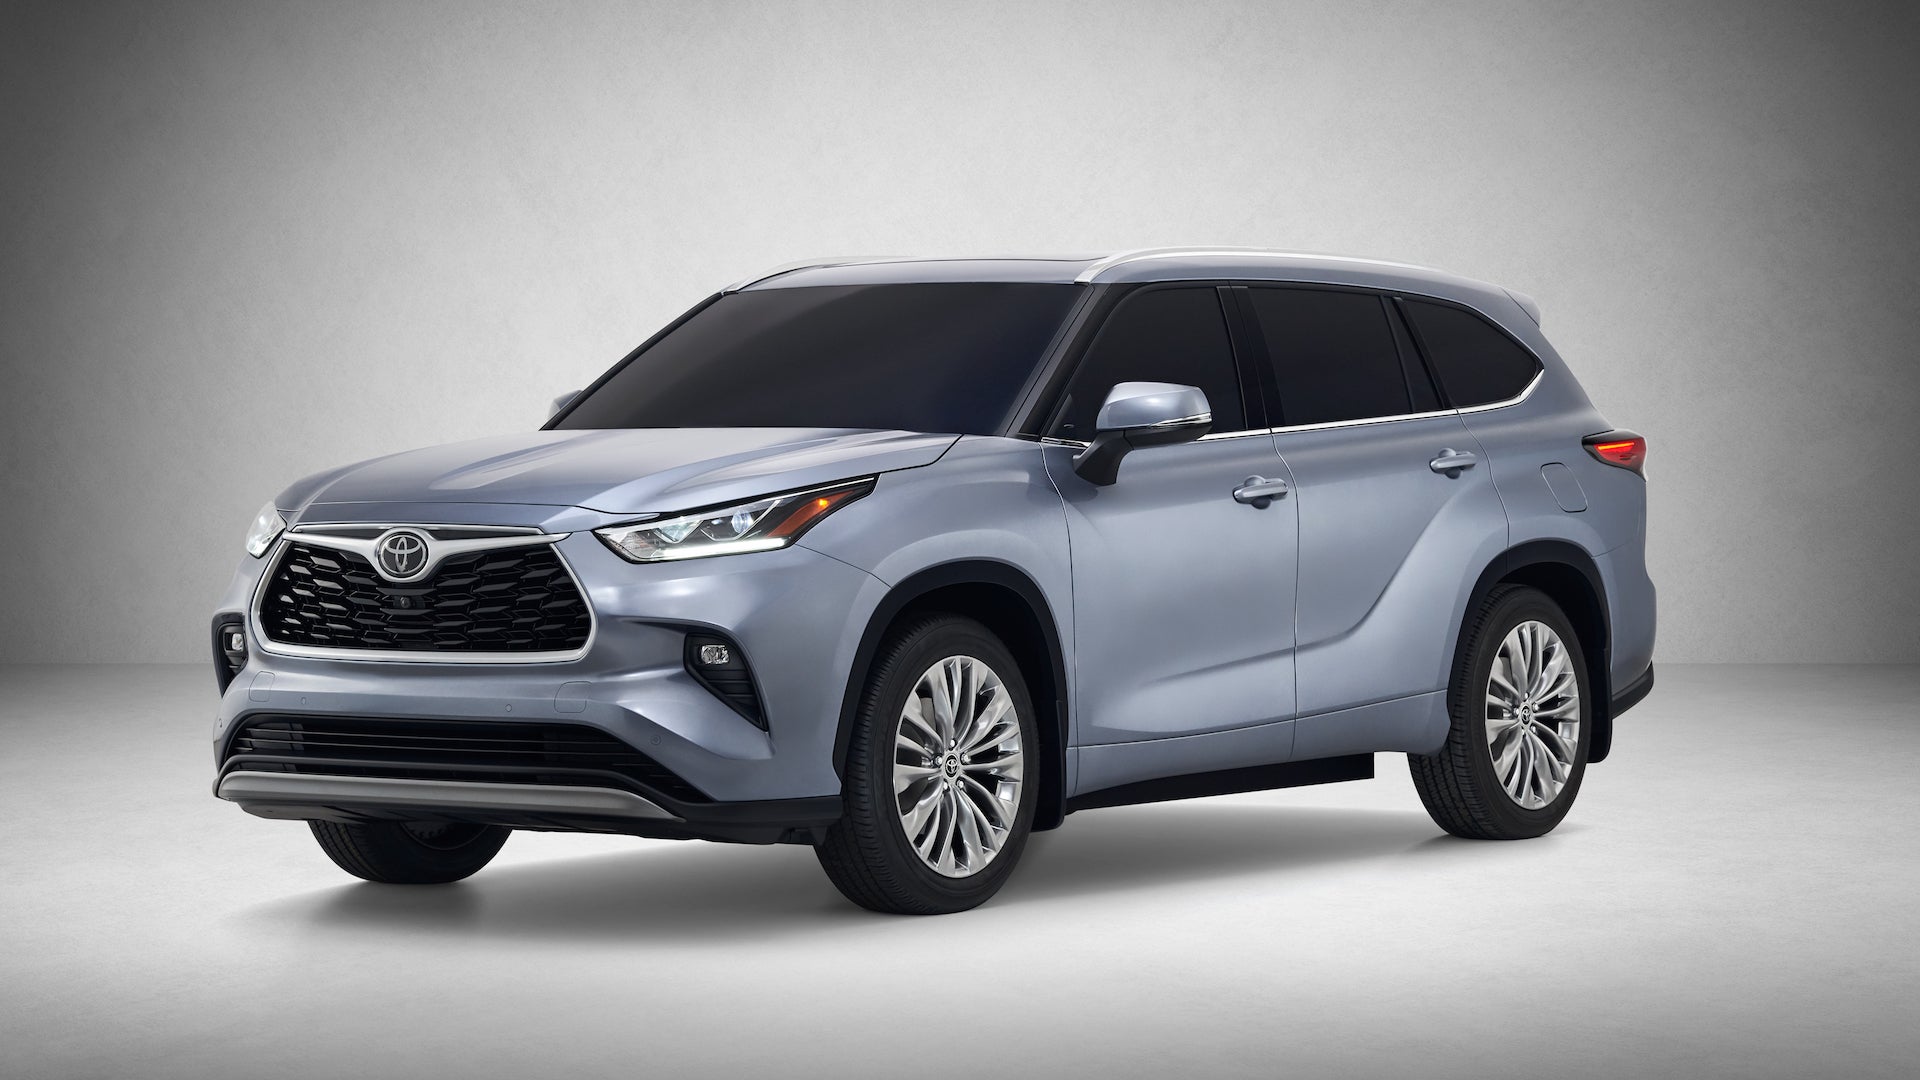 All-New 2020 Toyota Highlander SUV Debuts With Lexus Styling and Hybrid Variant